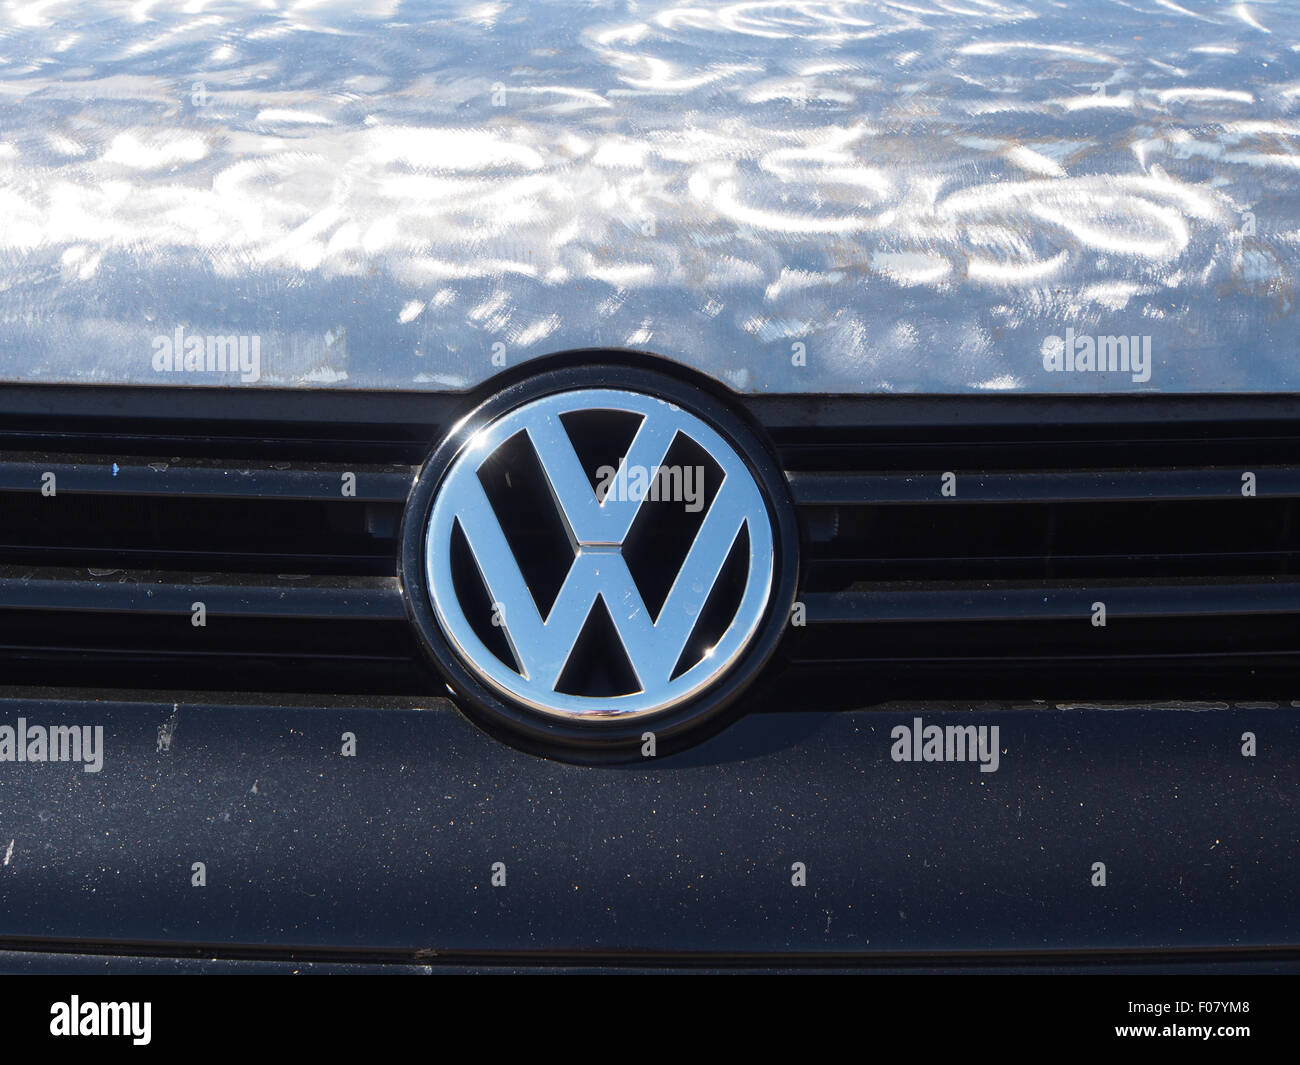 S Volkswagen logo on the front of a vehicle Stock Photo